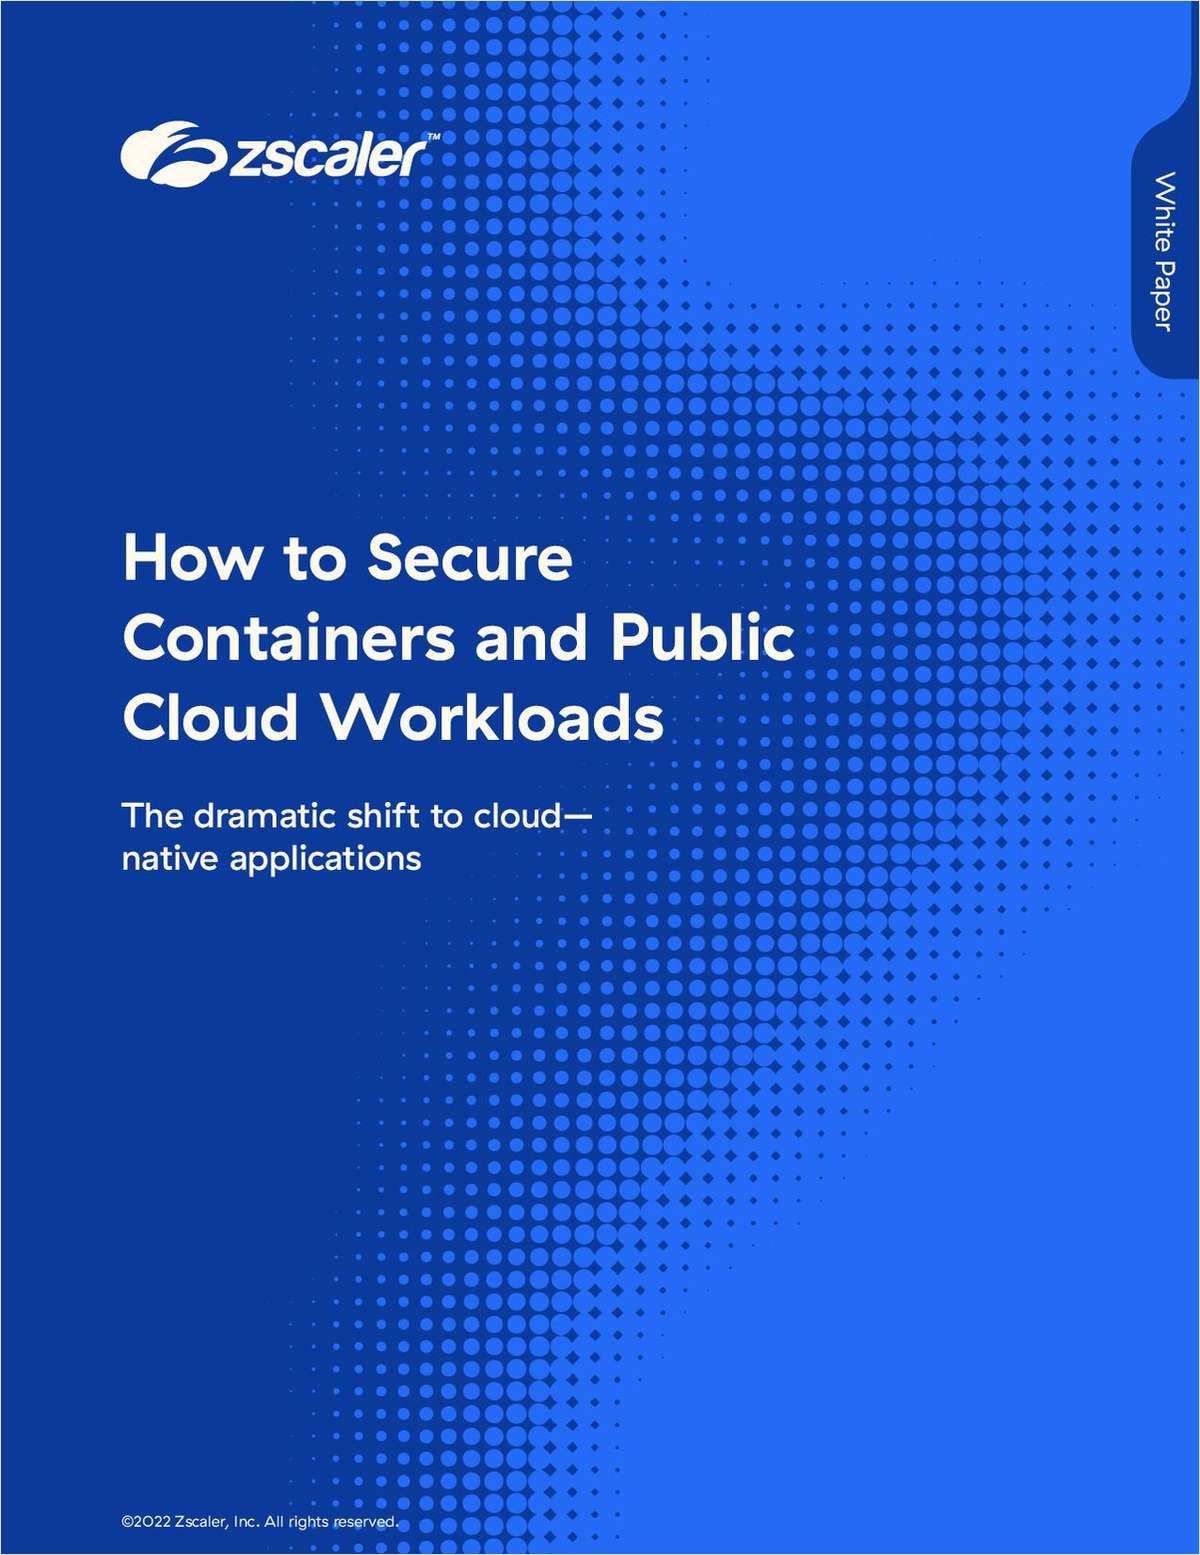 How to Secure Containers and Public Cloud Workloads